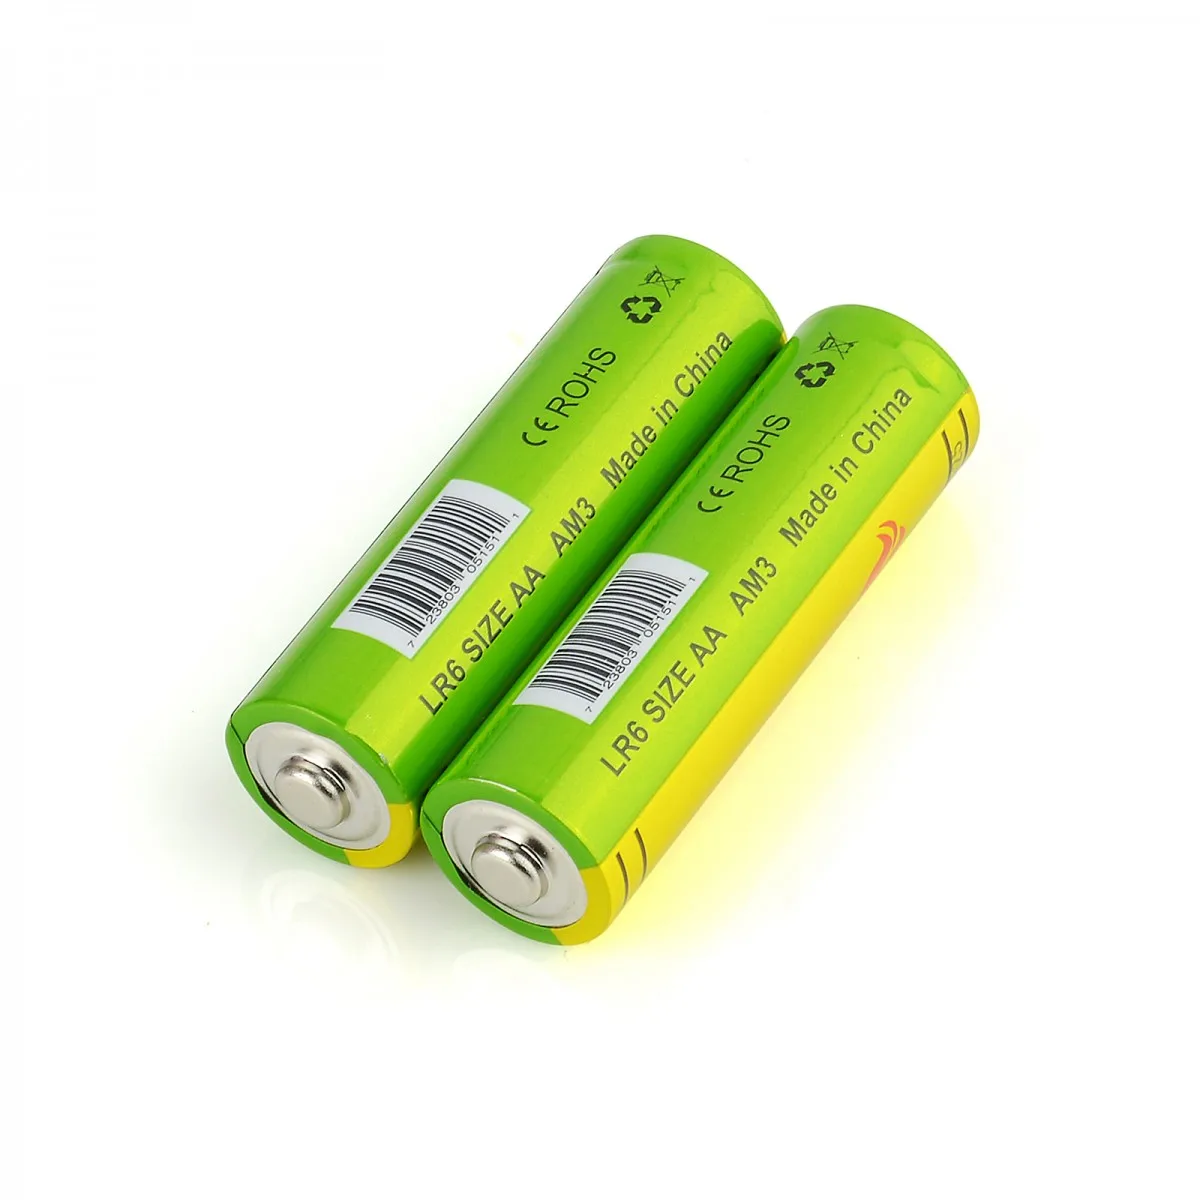 

UltraFire Basics Durable AA 1.5 Volt Performance Alkaline Battery For Remote Controls Radios Controllers Toys Small Flashlight